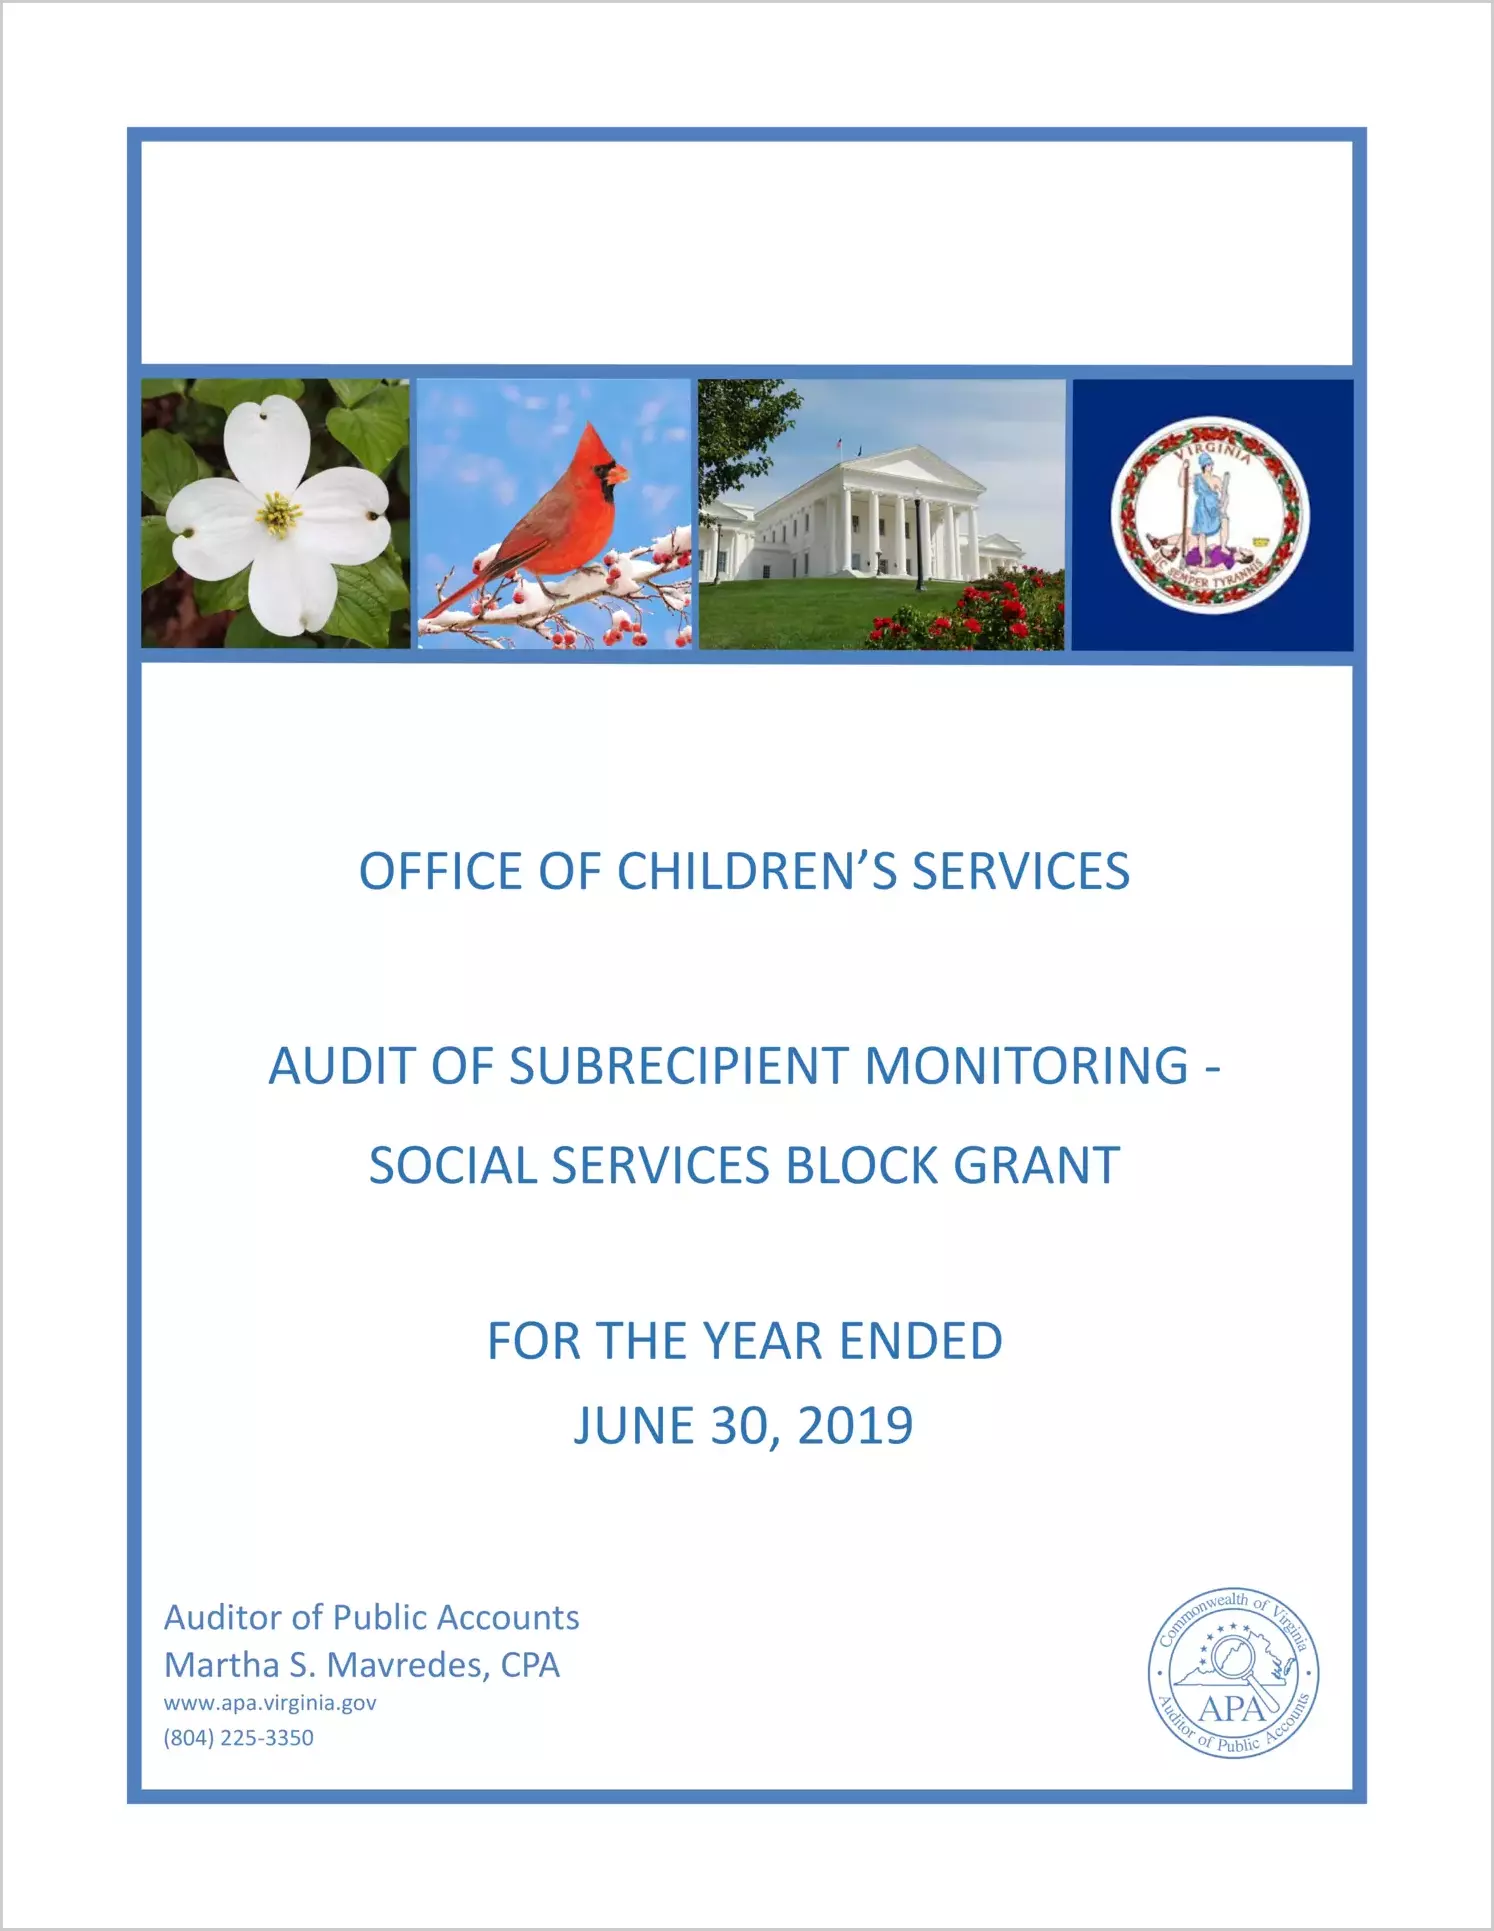 Office of Children's Services Subrecipient Monitoring - Social Services Block Grant for the year ended June 30, 2019